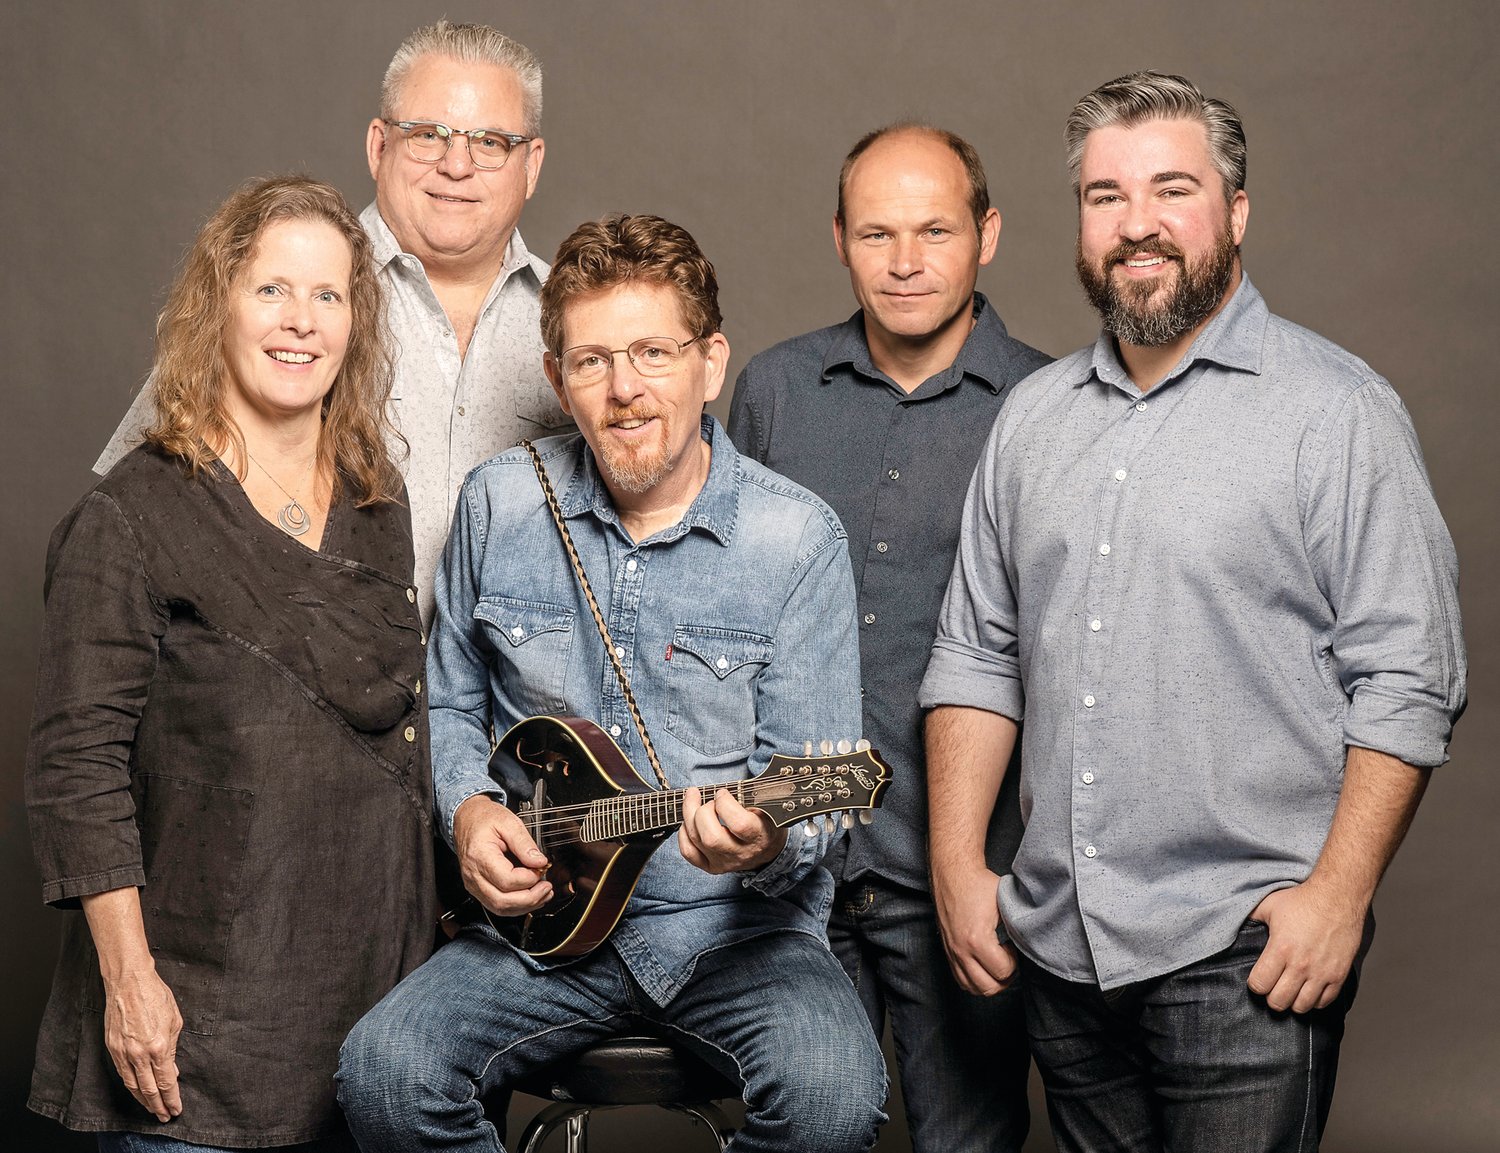 The Tim O’Brien Band comes to Sellersville July 15.